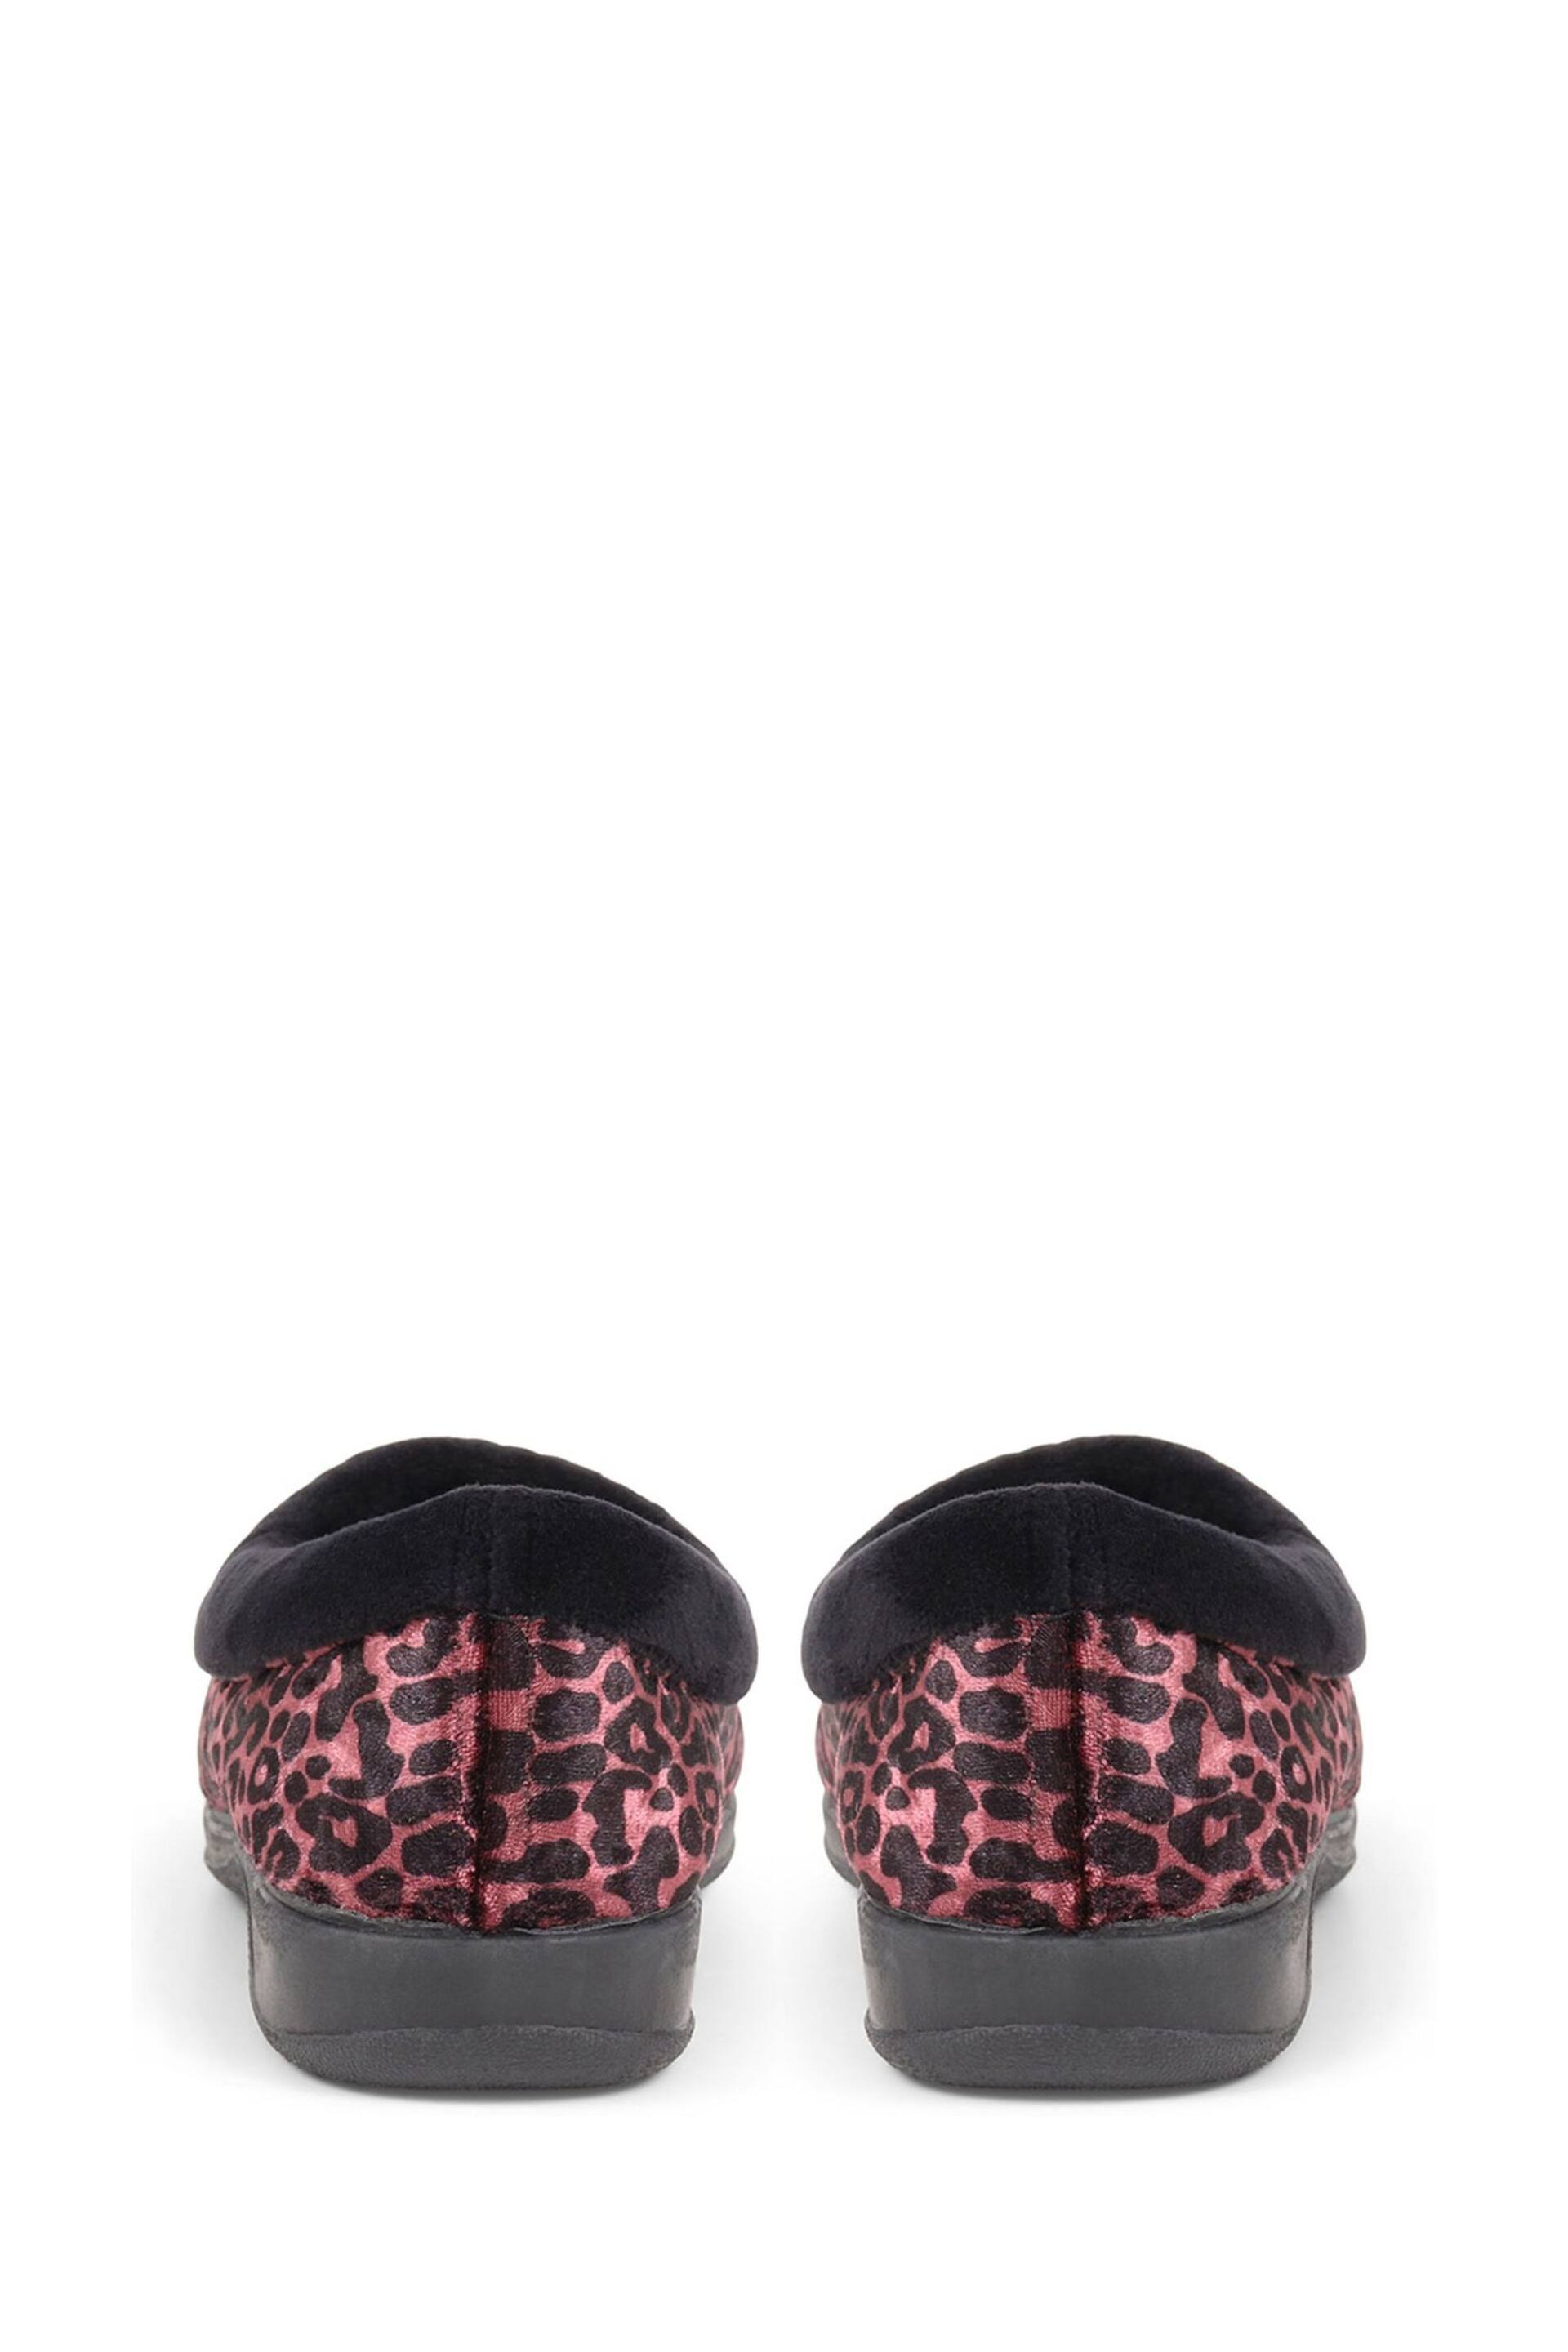 Pavers Red Leopard Print Casual Slippers - Image 3 of 5